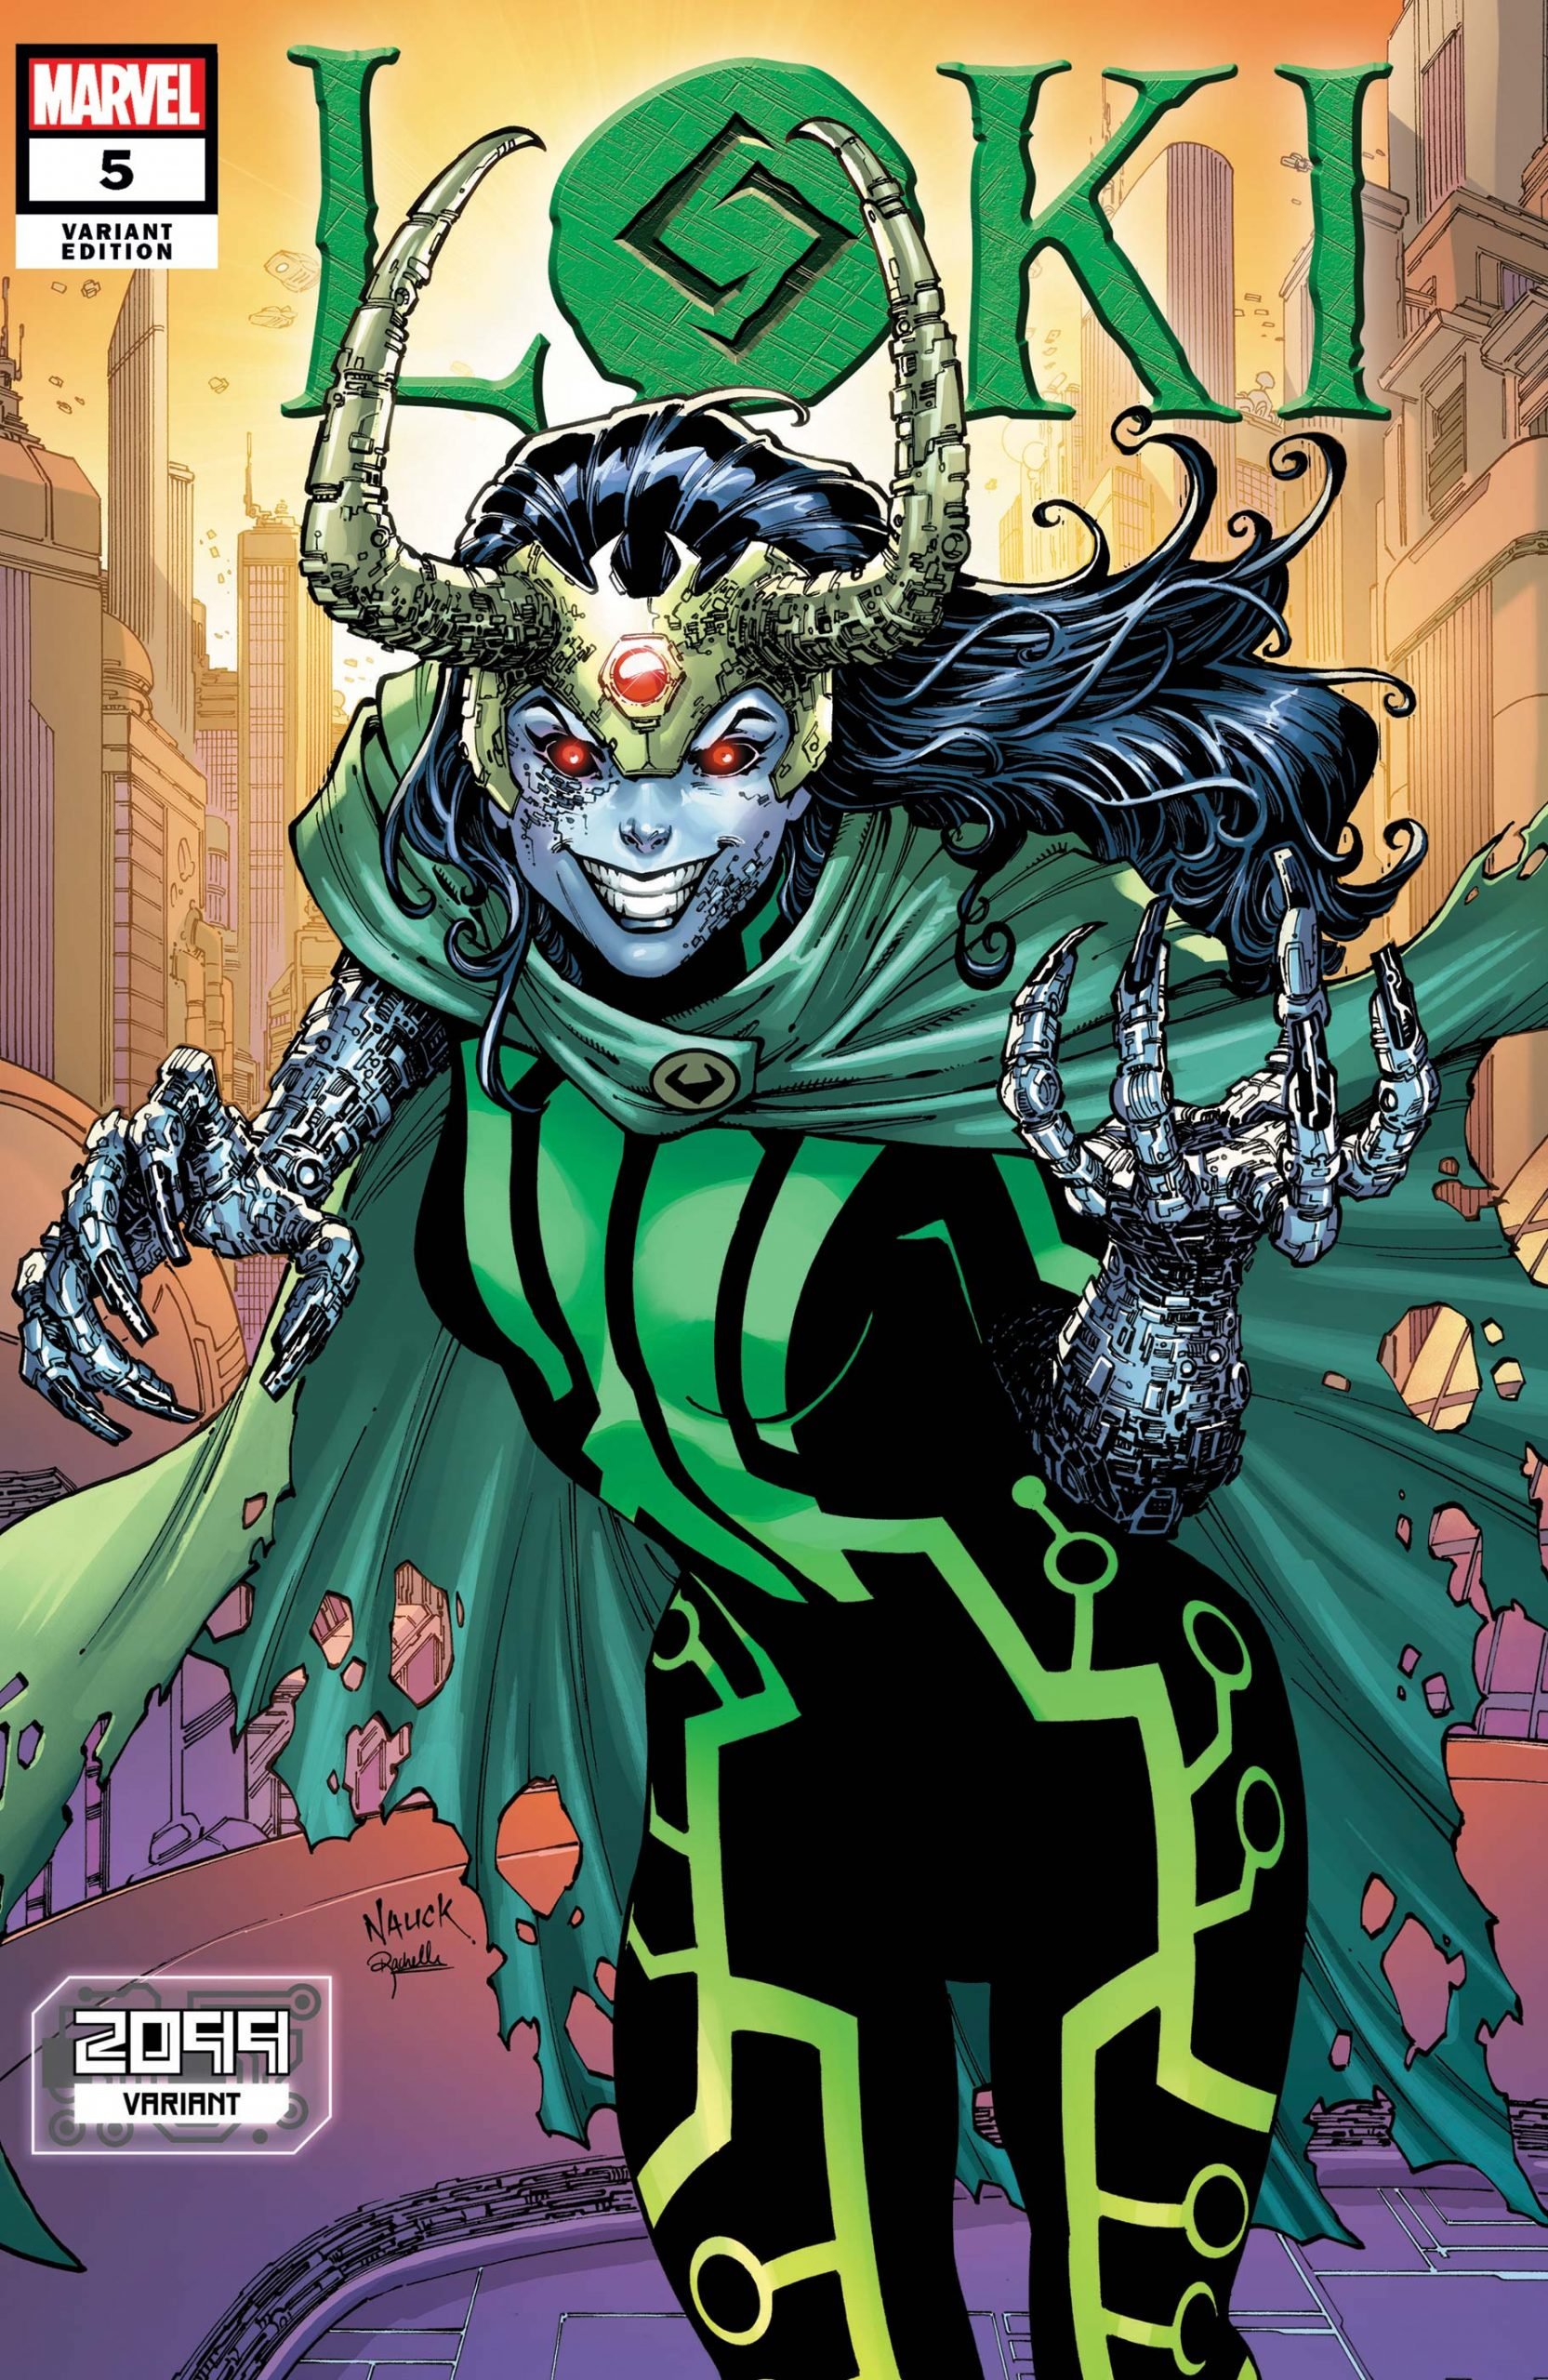 11.Then there were all the variants of Loki throughout the comics...